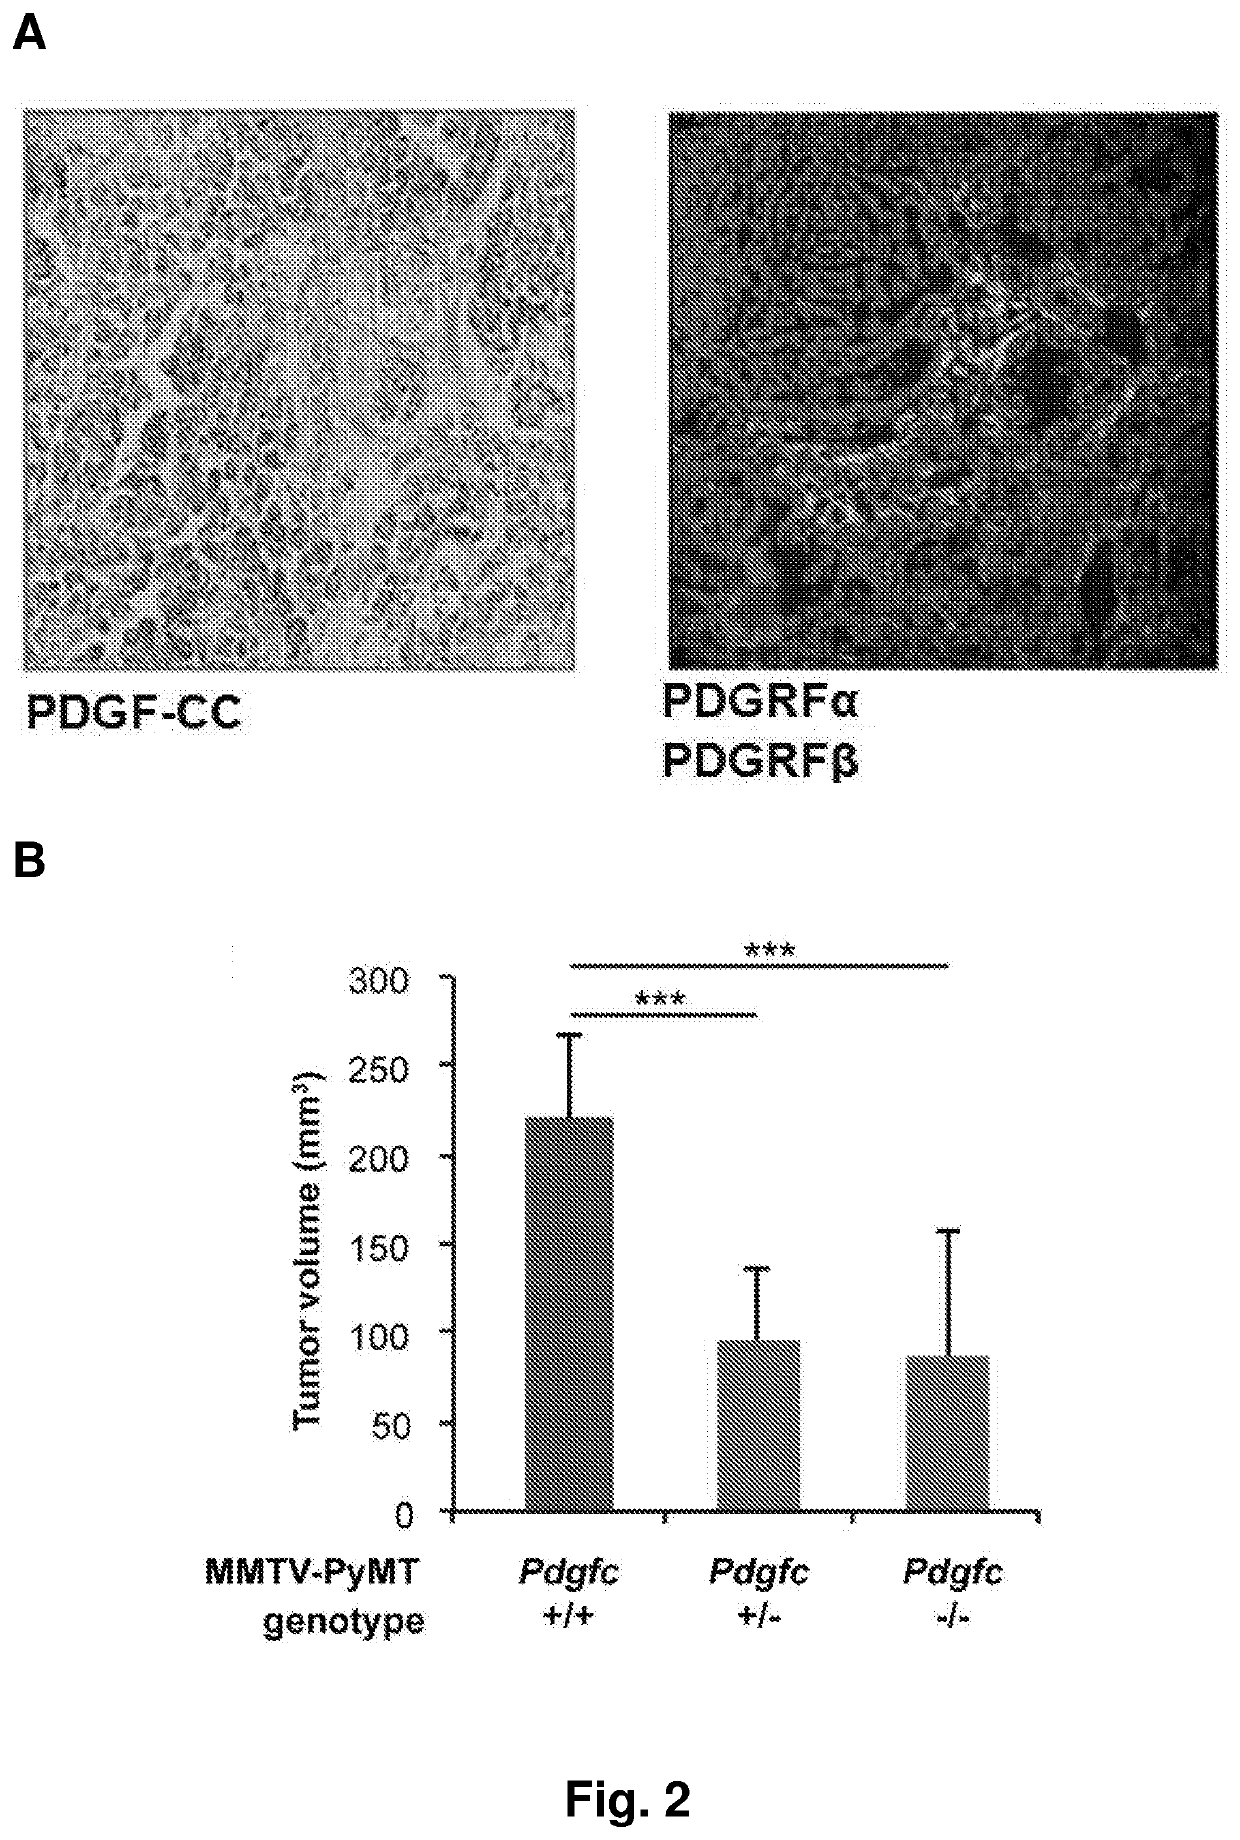 Treatment of er-negative breast cancer with an pdgf-cc inhibitor and Anti-estrogen